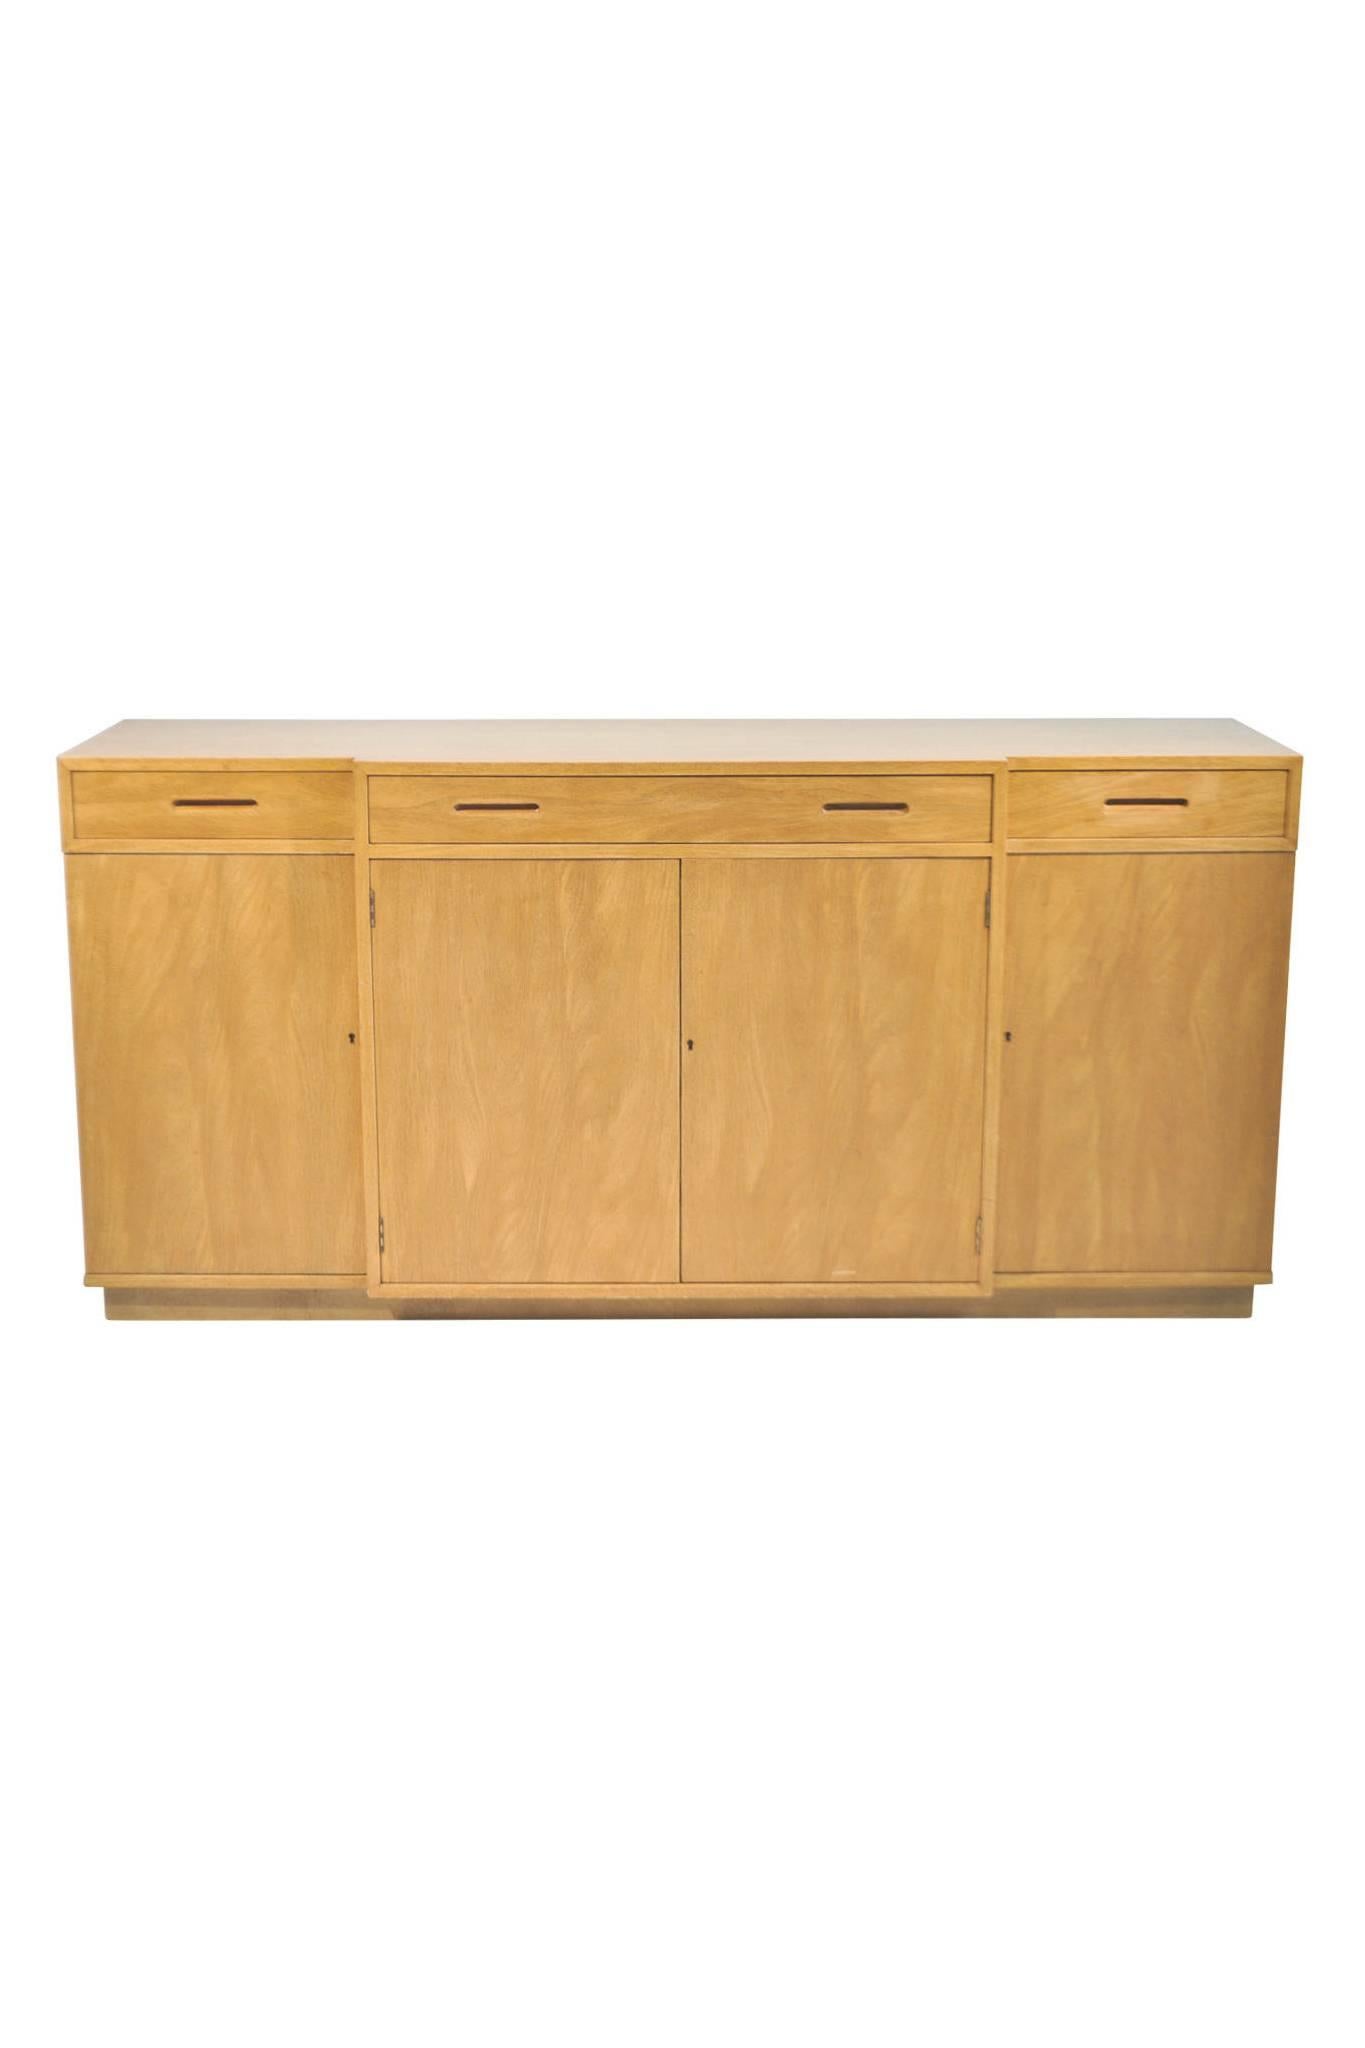 This exceptional sideboard was designed by Edward Wormley for Dunbar Furniture's New World Collection. Wormley's modernist design can be characterized as making use of simple surfaces and silhouettes while exemplifying fine woodwork. 

This